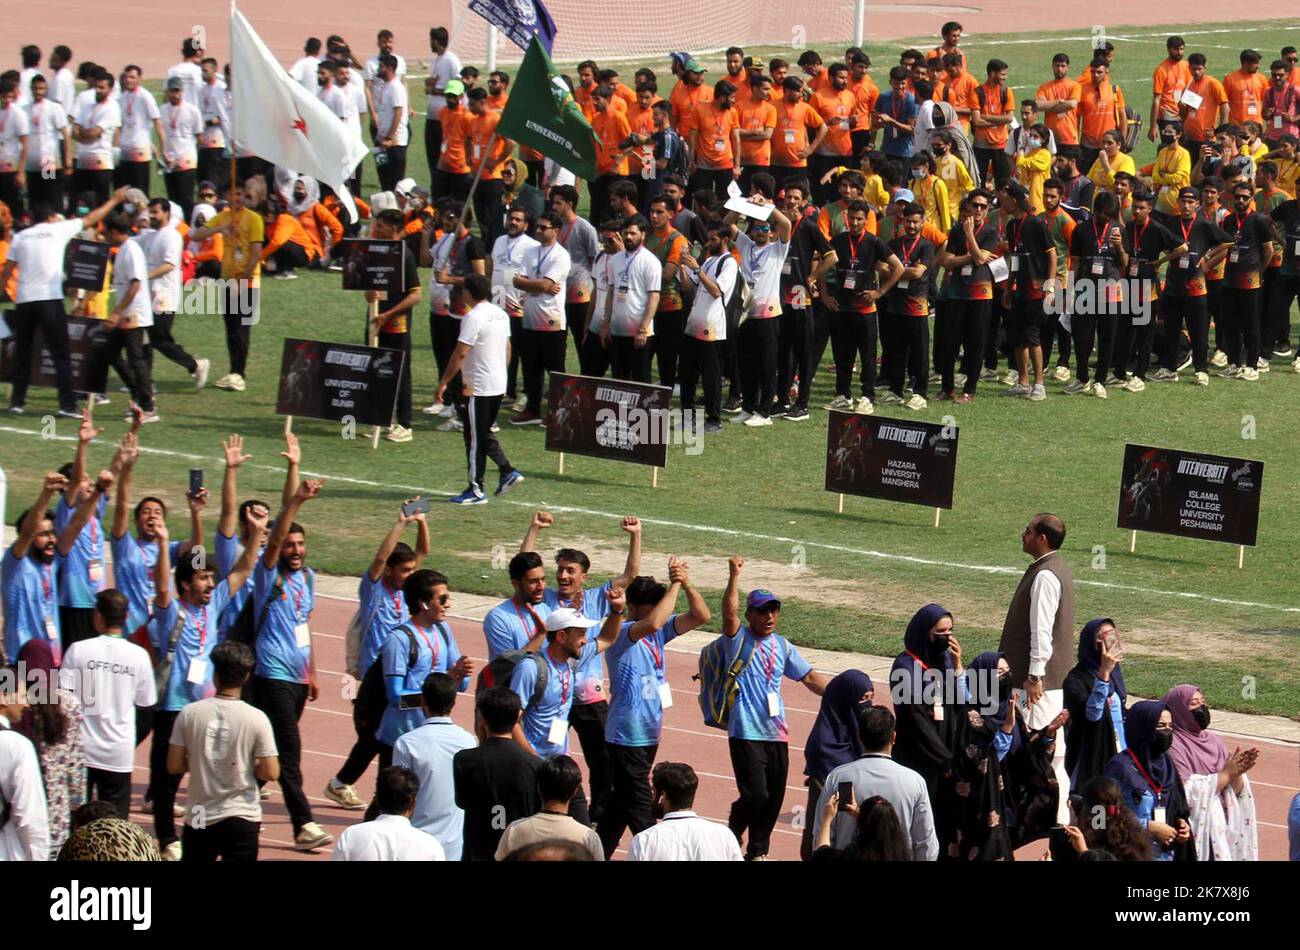 View of opening ceremony of Inter-University Khyber Pakhtunkhwa Games held at Peshawar Sports Complex on Wednesday, October 19, 2022. Inter- University Khyber Pakhtunkhwa Games carrying 3000 athletes from 30 public universities got underway here in a colourful opening ceremony at Peshawar Sports Complex on Wednesday. Stock Photo